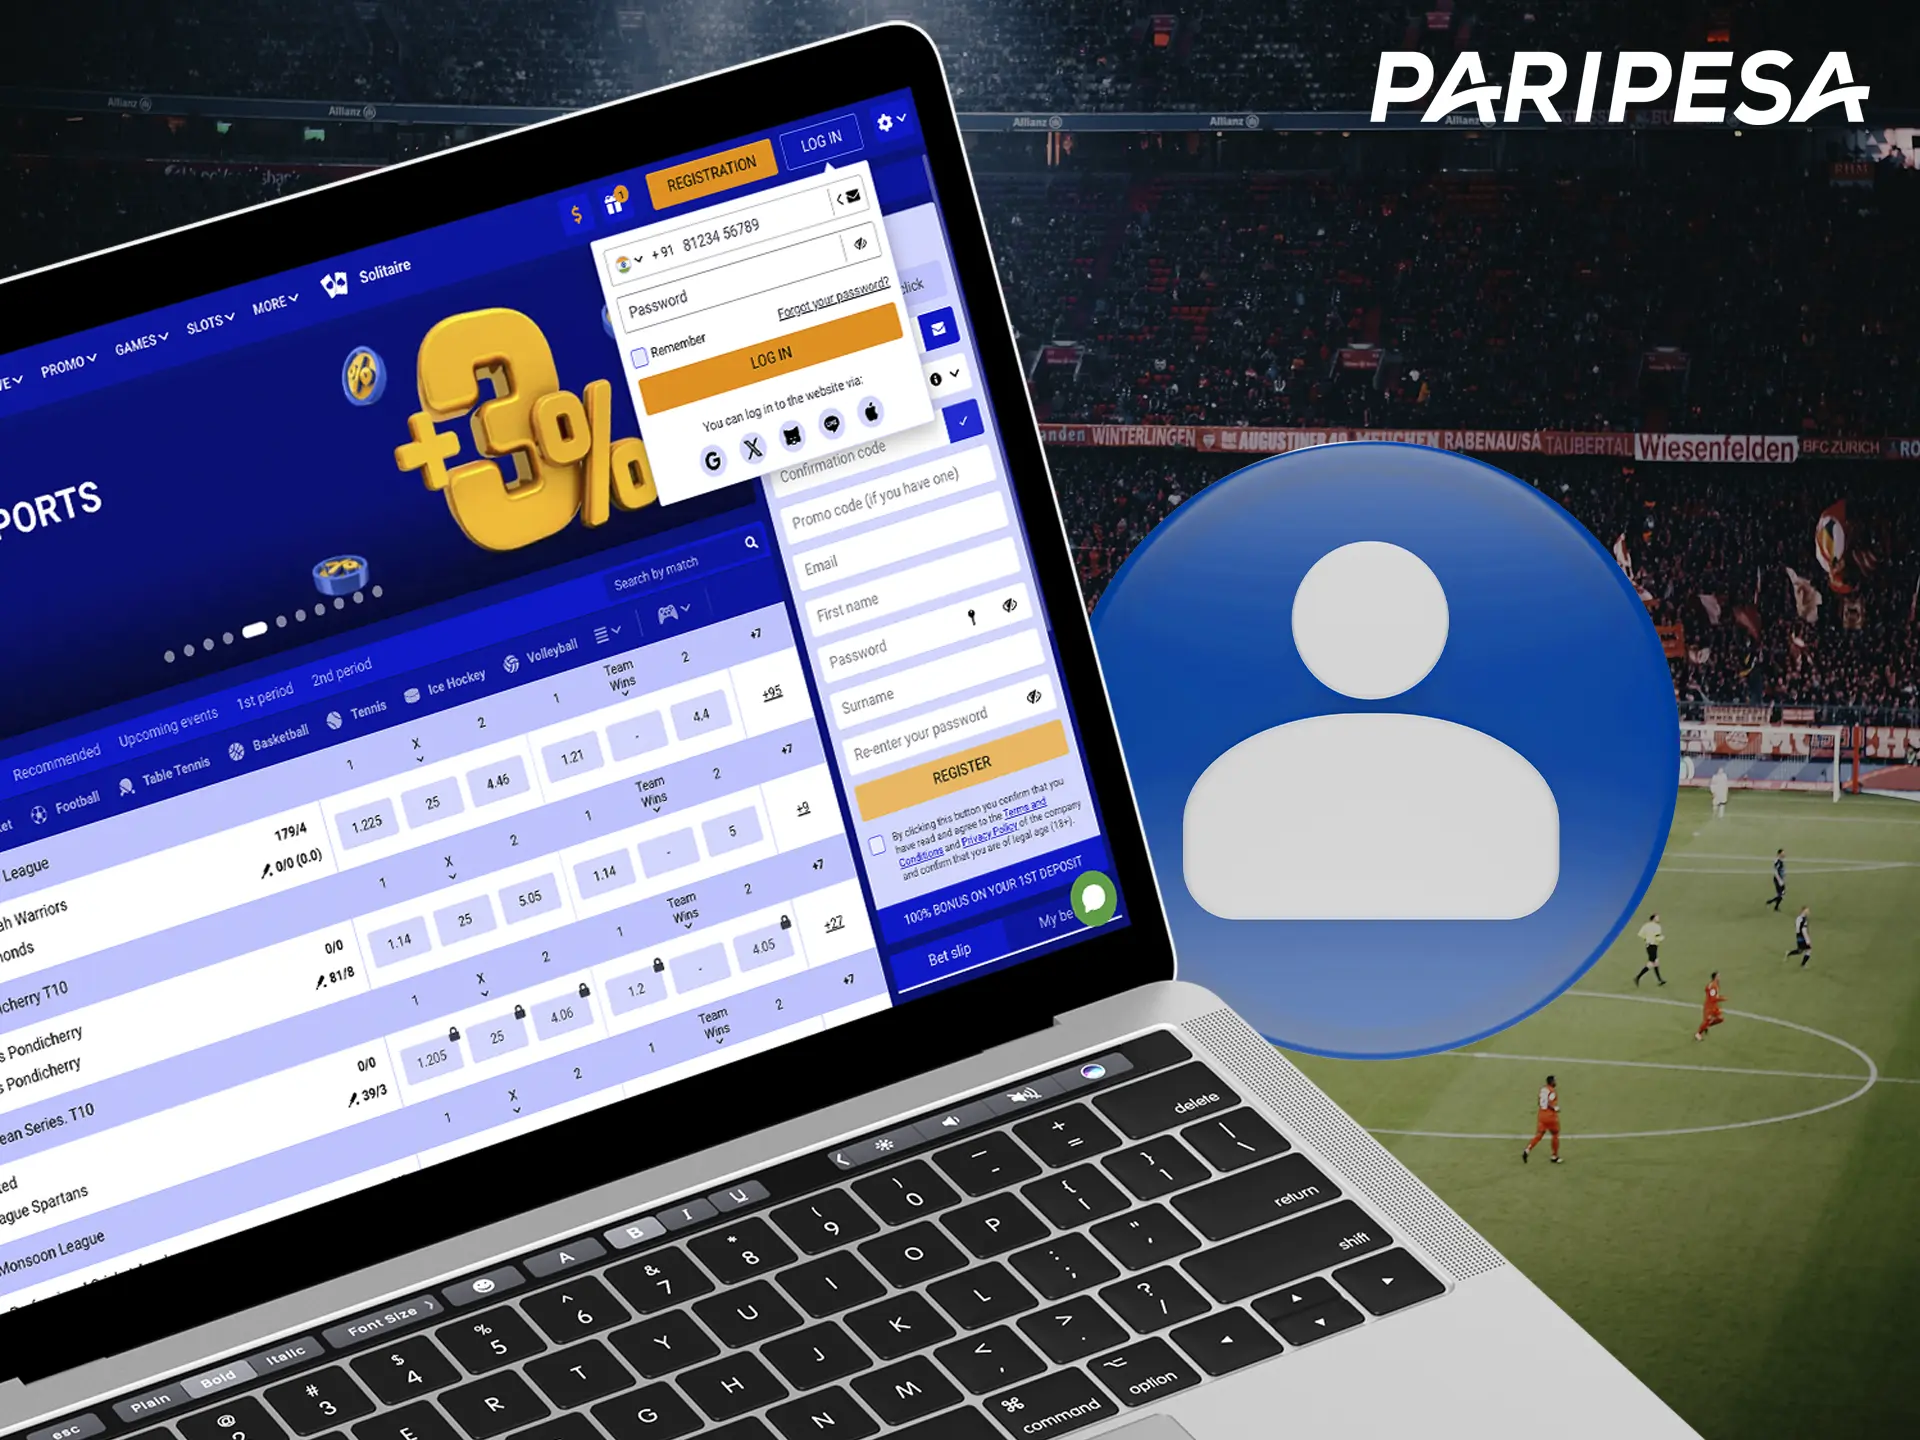 Log in to your account to get the opportunity to bet at Paripesa.